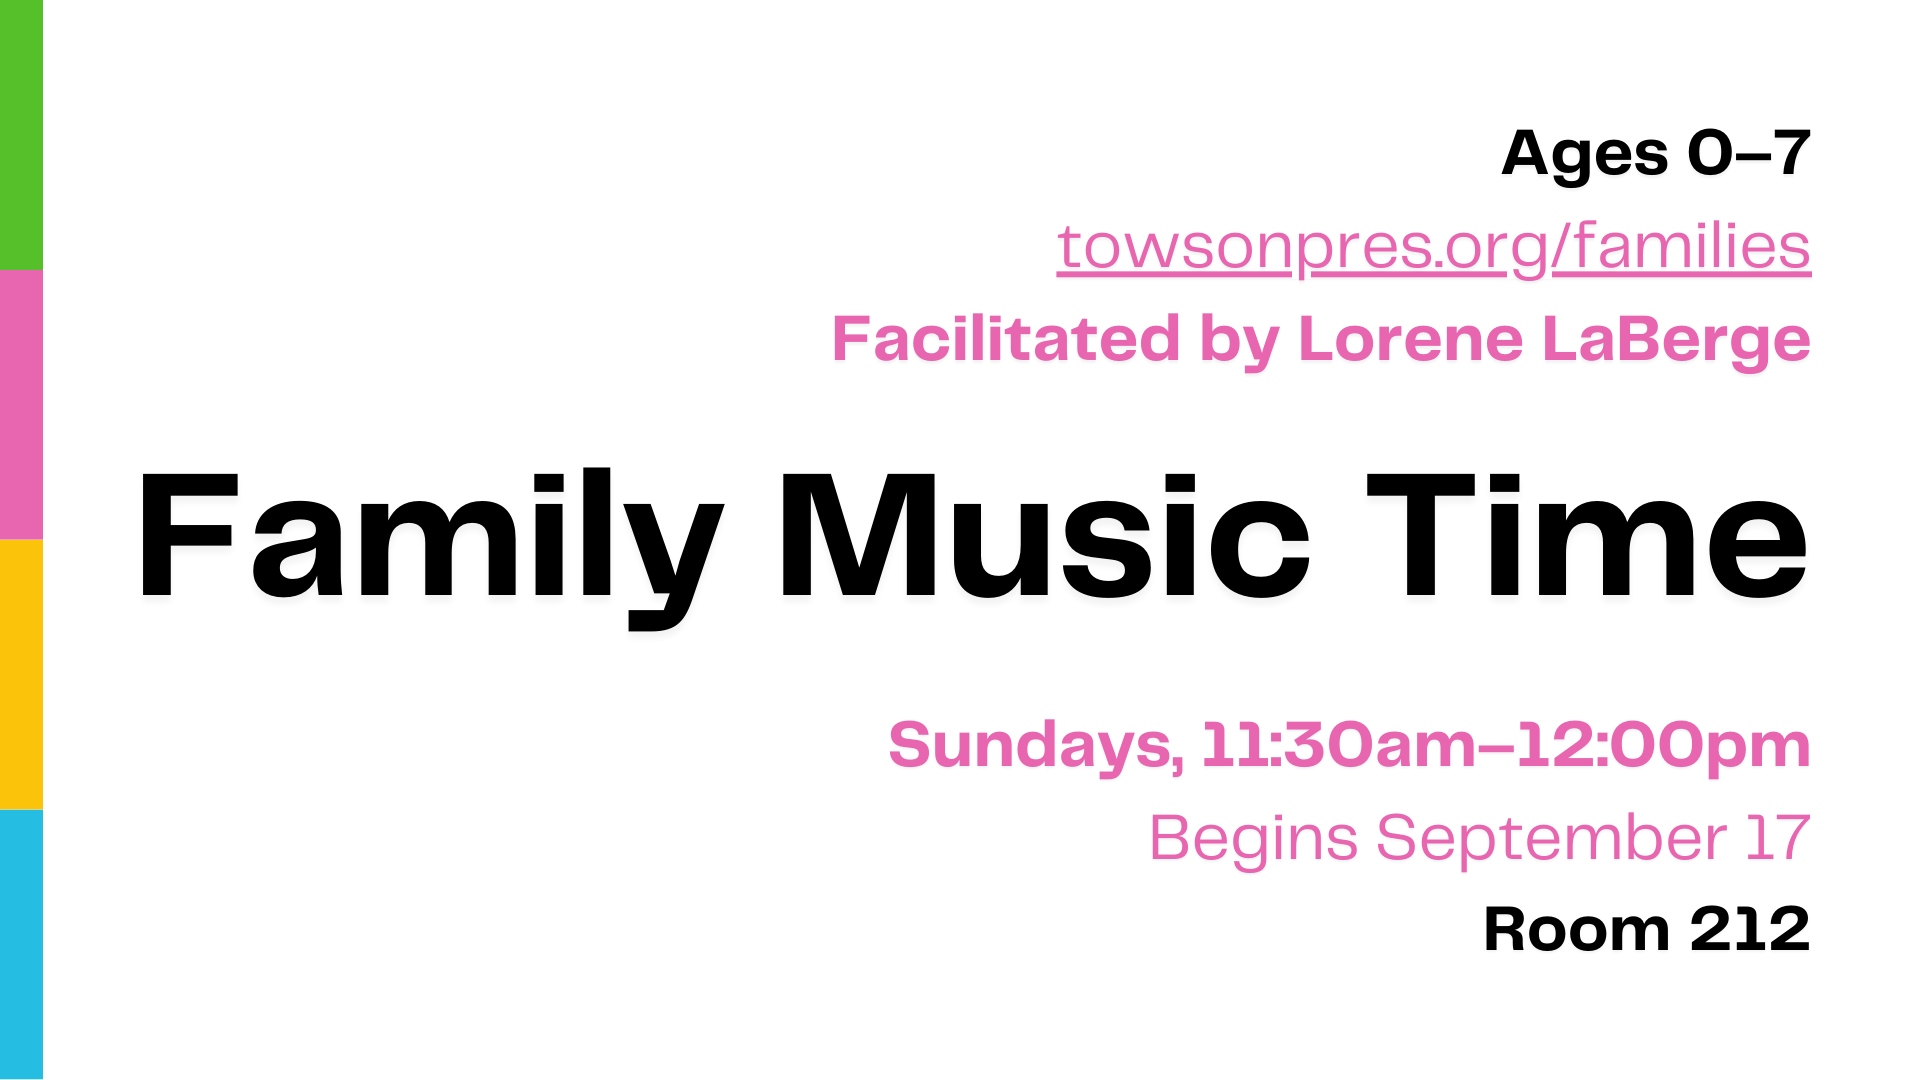 Graphic that reads: "Ages 0-7. towsonpres.org/families. Facilitated by Lorene LaBerge. Family Music Time. Sundays, 11:30am-12:00pm. Begins September 17. Room 212."